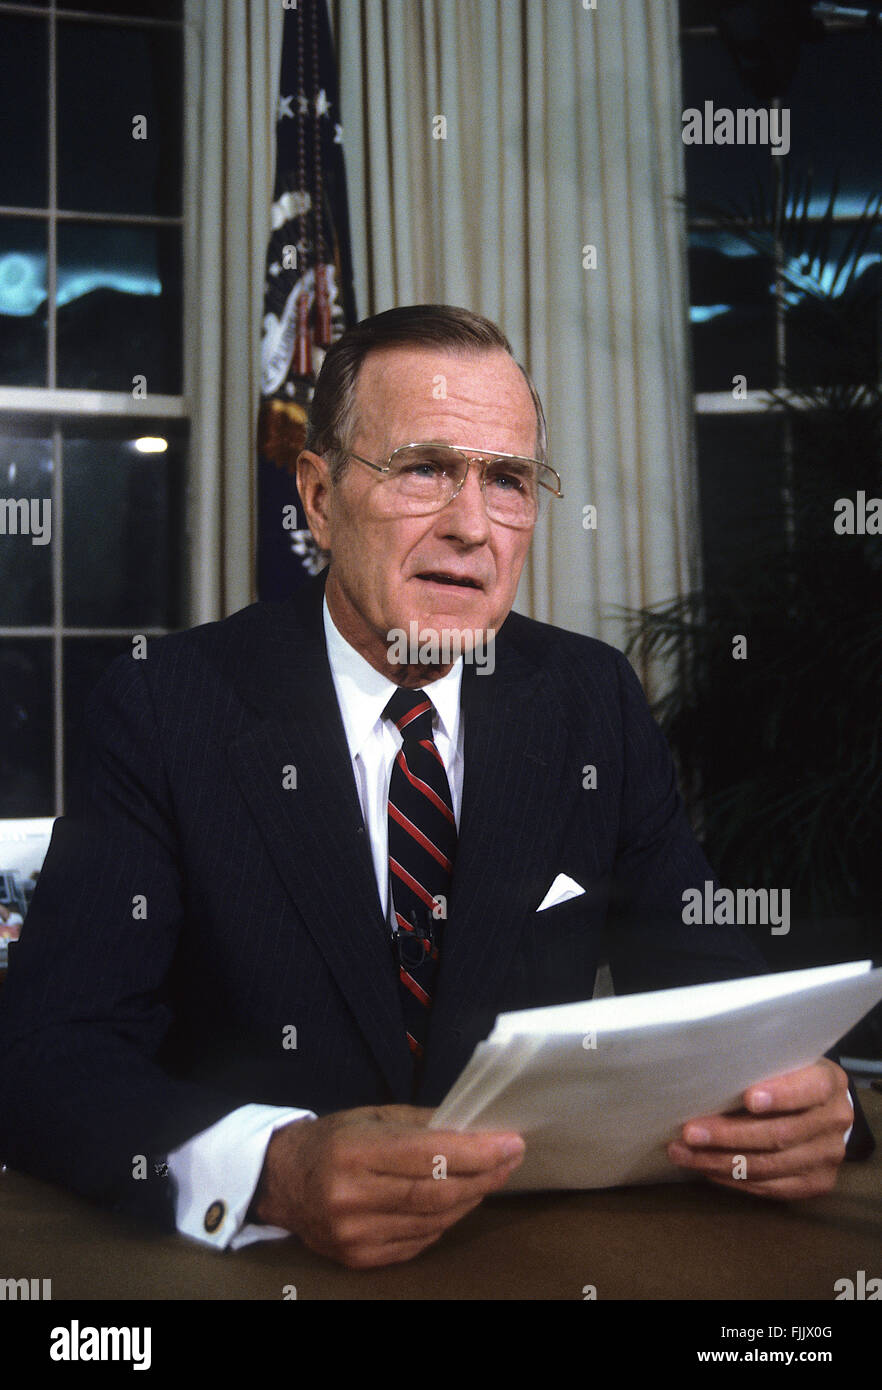 Washington, DC., USA, 27th September, 1991 President George H.W. Bush gives televised speech from the Oval Office on Nuclear Arms Reduction. Bush announced a raft of unilateral initiatives to limit and reduce the U.S. tactical nuclear weapons arsenal. (1) withdraw to the United States all ground-launched short-range weapons deployed overseas and destroy them along with existing U.S. Stockpiles of the same weapons: and (2) cease deployment of tactical nuclear weapons on surface ships, attack submarines, and land-based naval aircraft during 'normal circumstances' Credit: Mark Reinstein Stock Photo